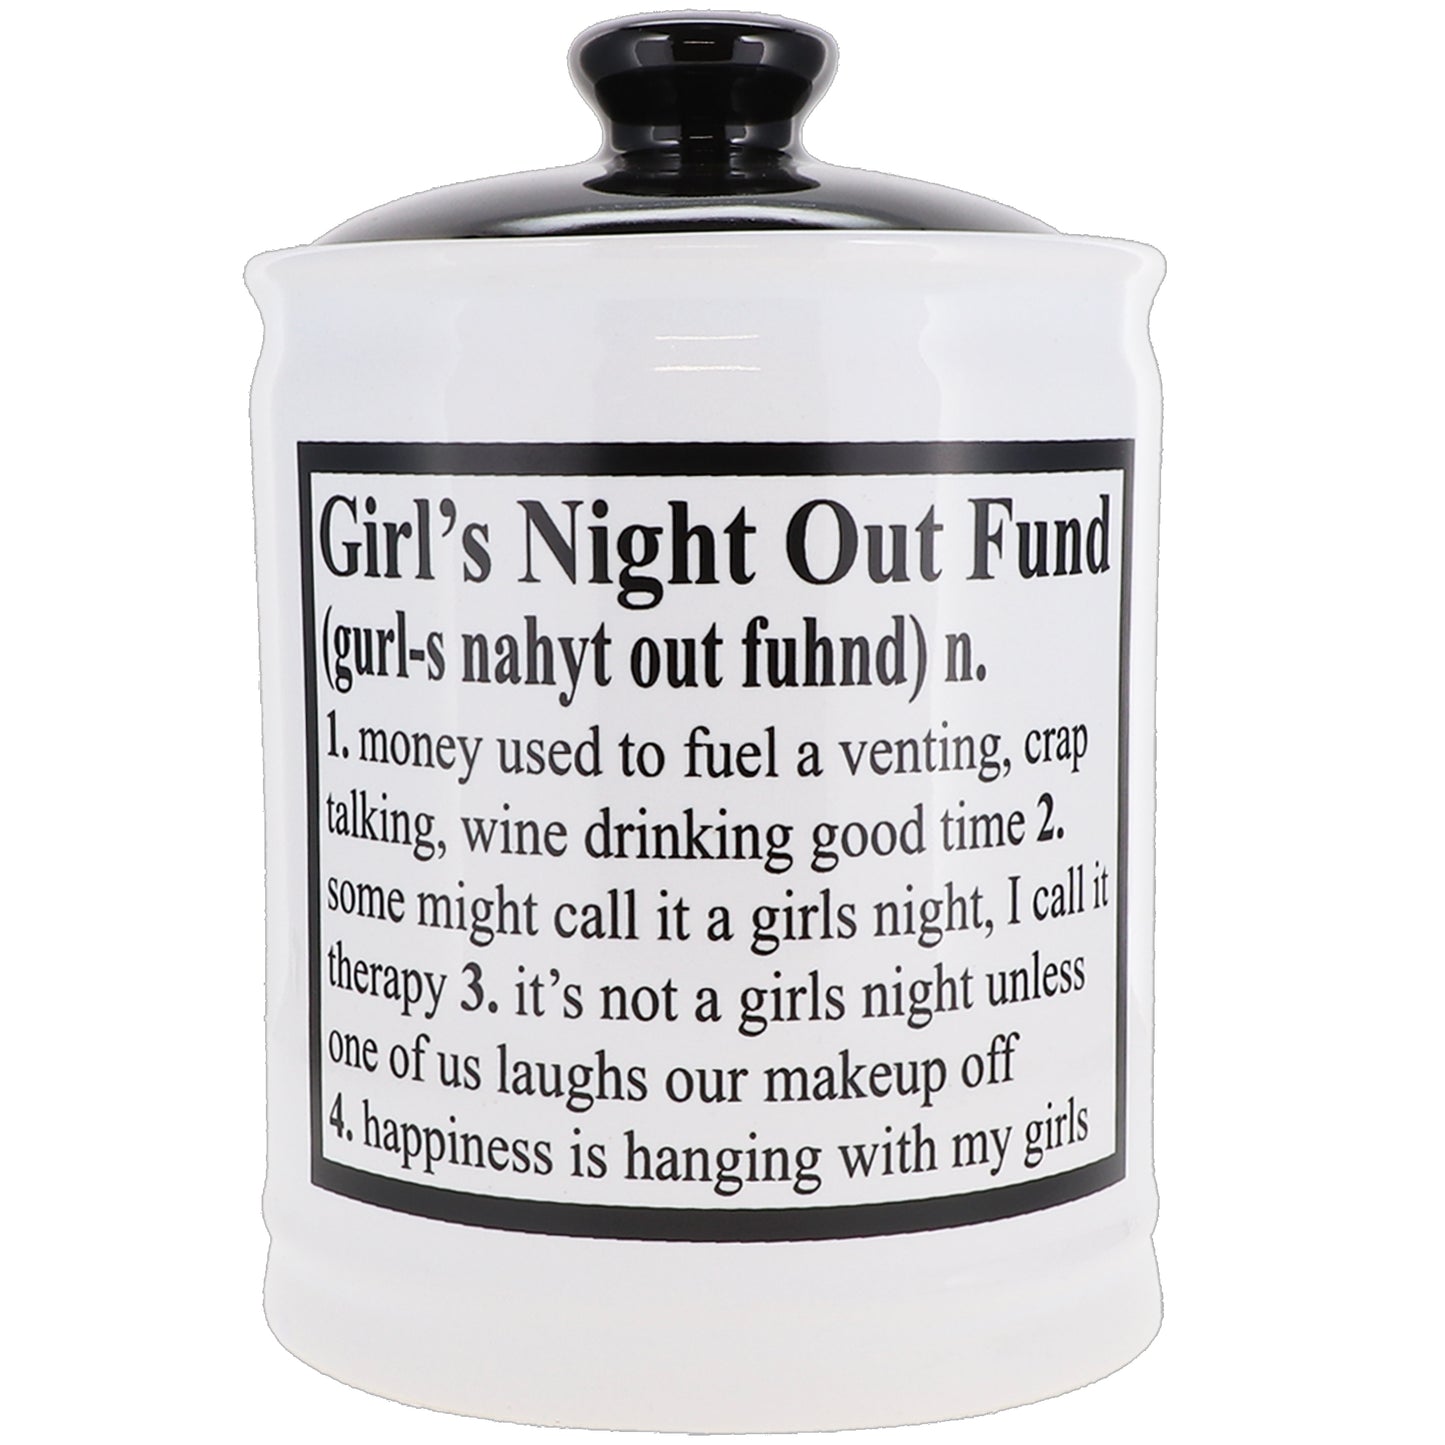 Cottage Creek Girls Night Out Fund Piggy Bank, Ceramic, Multicolored, 6" Candy Jar, Friend Gifts